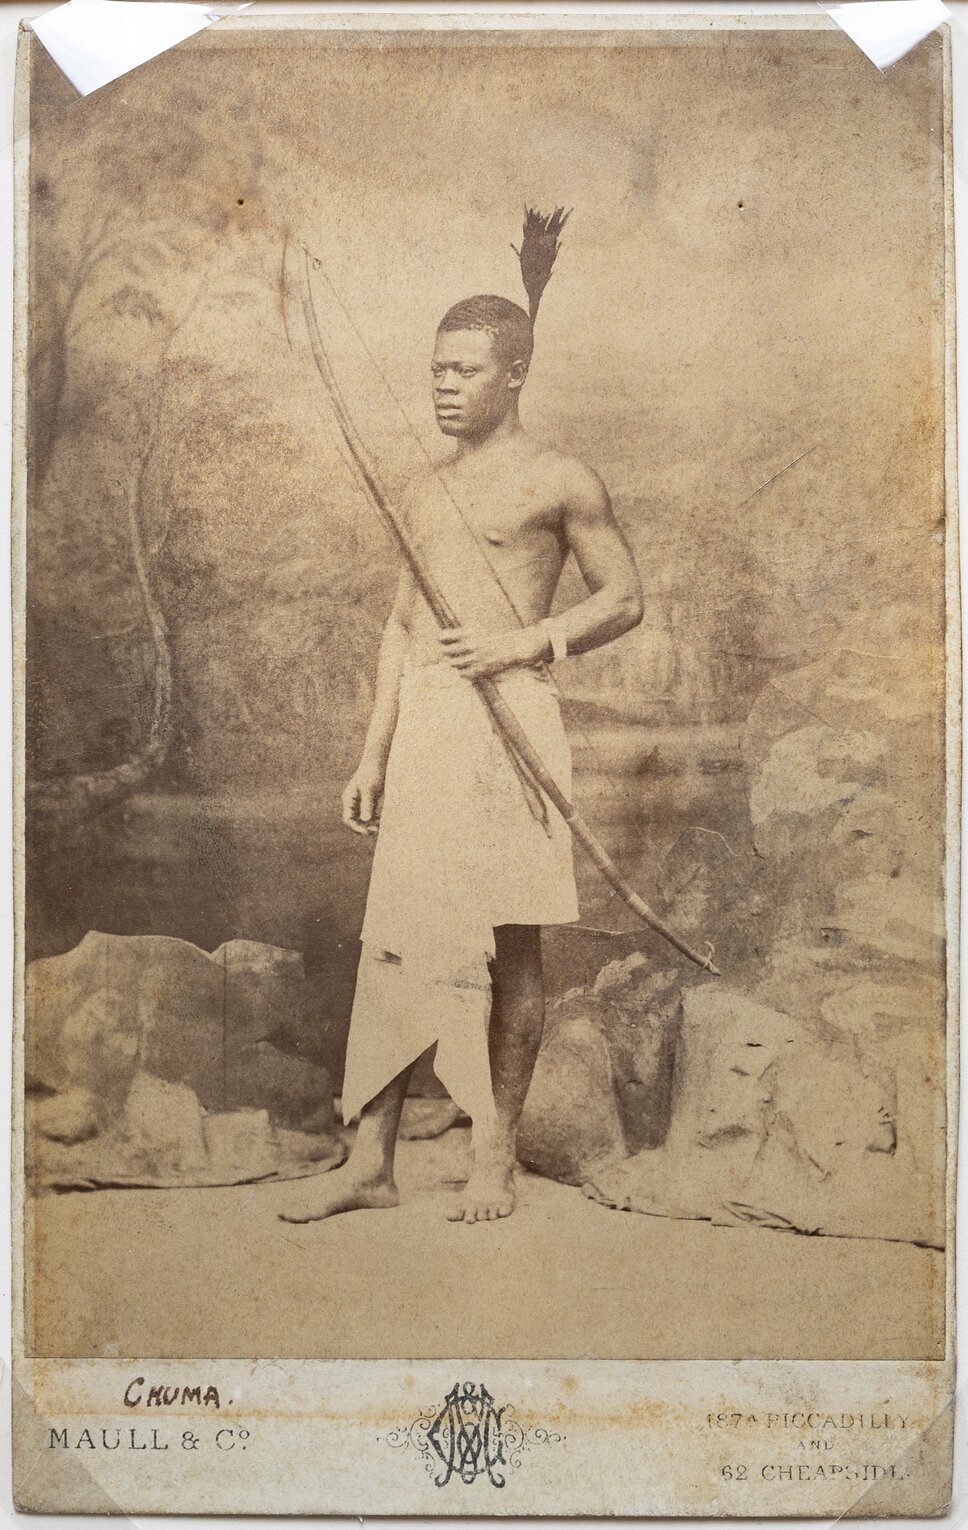 Chuma, standing, in traditional waist covering, with long bow and arrow.